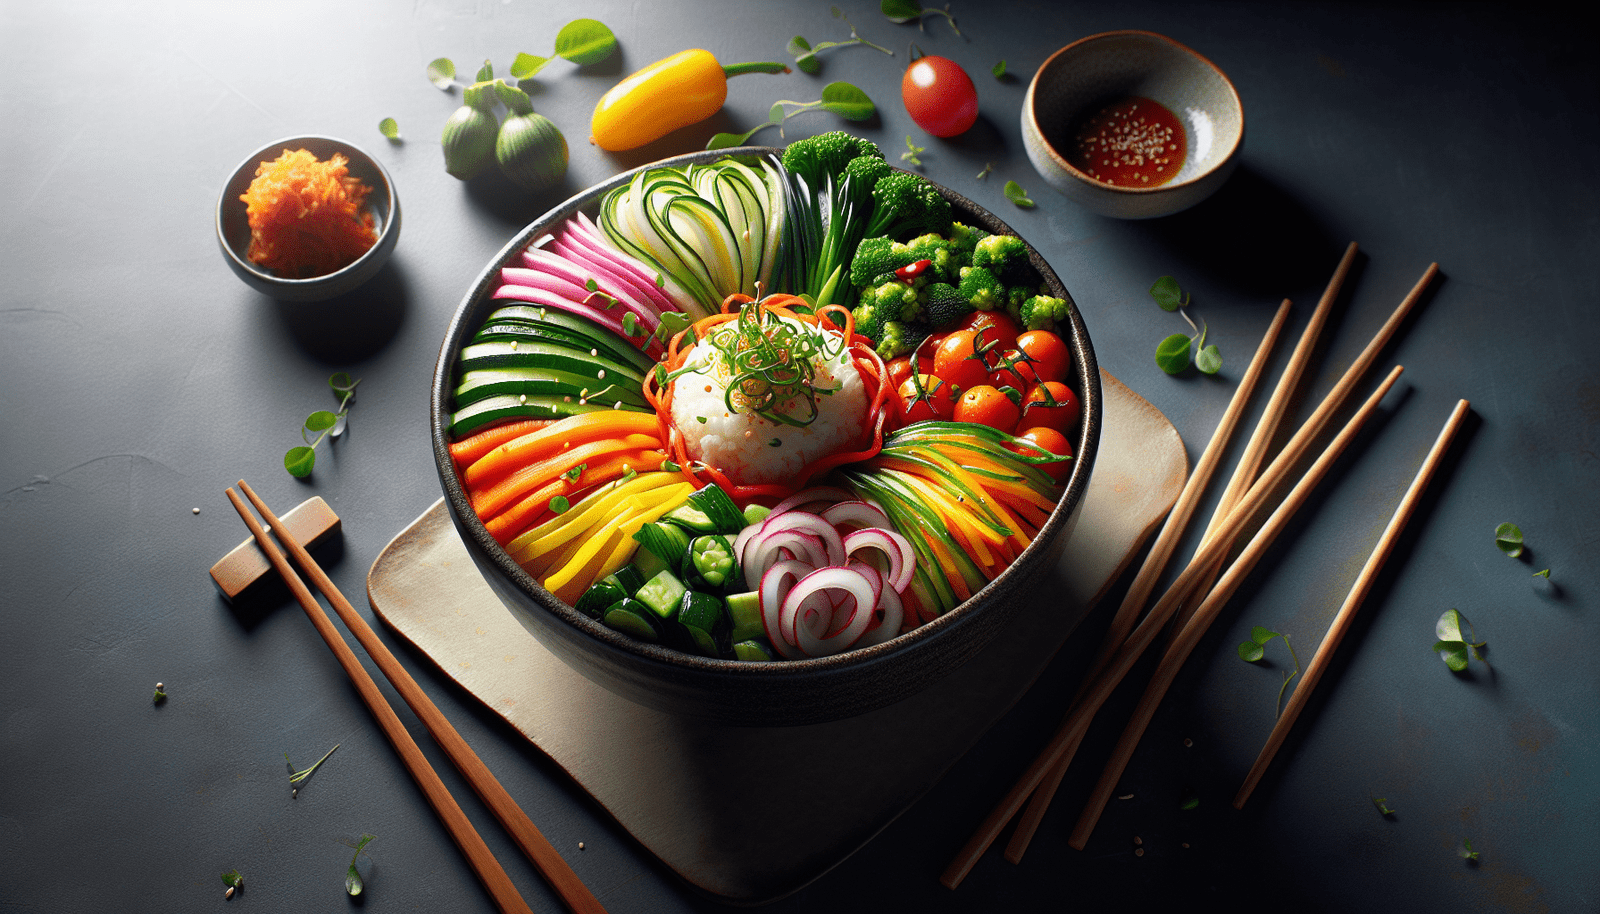 What Are The Current Trends In Creating Visually Appealing Korean Dishes For Social Media?